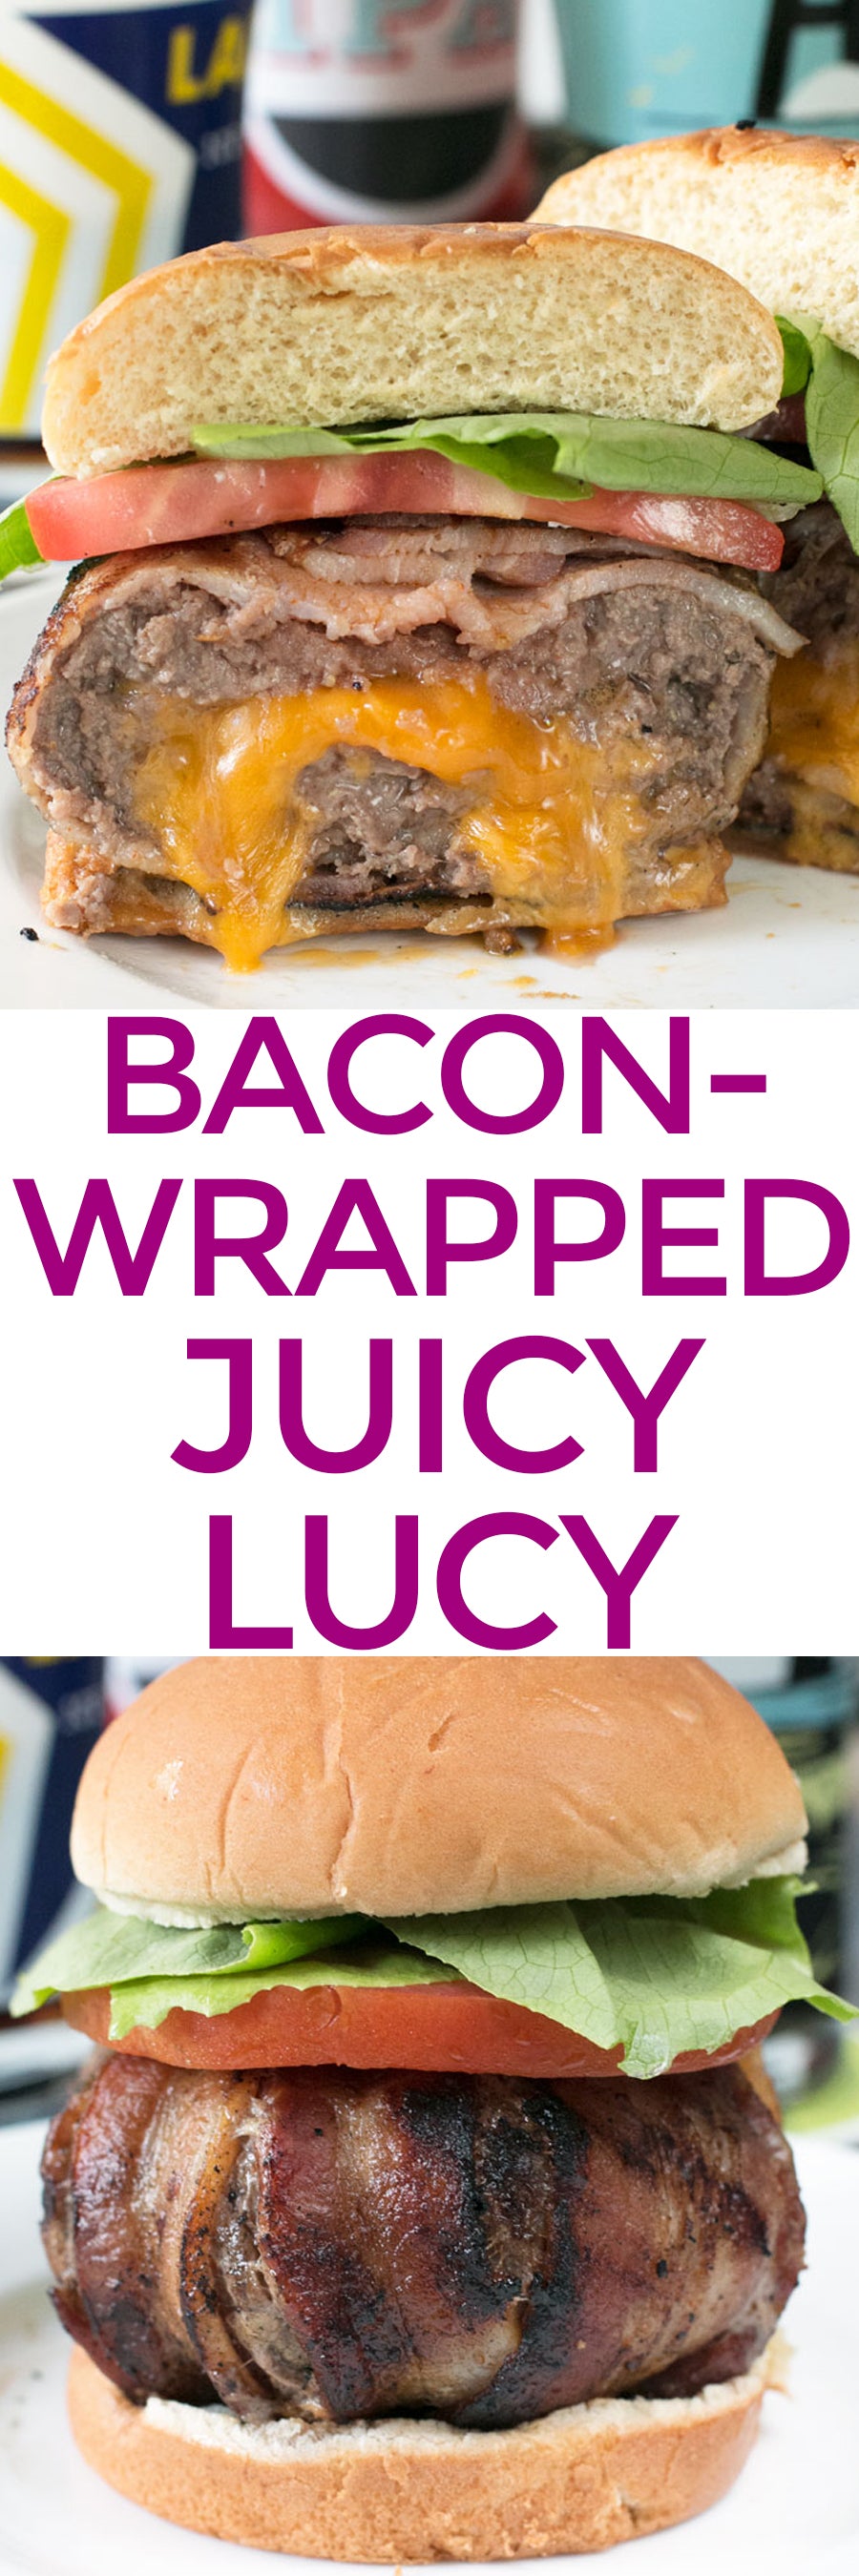 Bacon-Wrapped Juicy Lucy | pigofthemonth.com #baconwrapped #burger #grilling